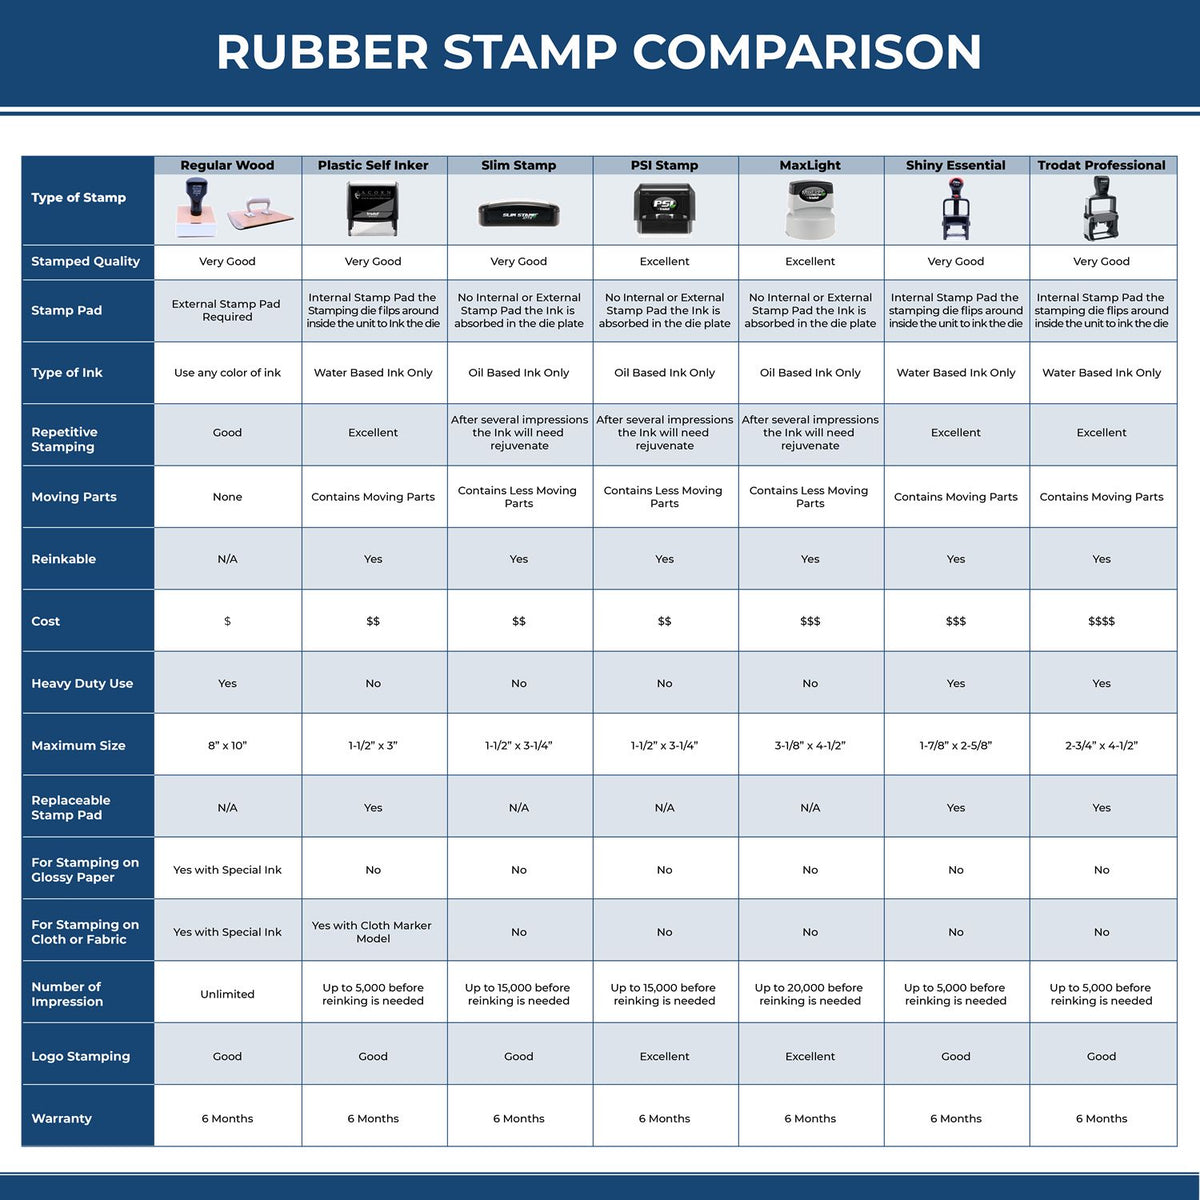 Returned Not Paid Rubber Stamp 4286R Rubber Stamp Comparison